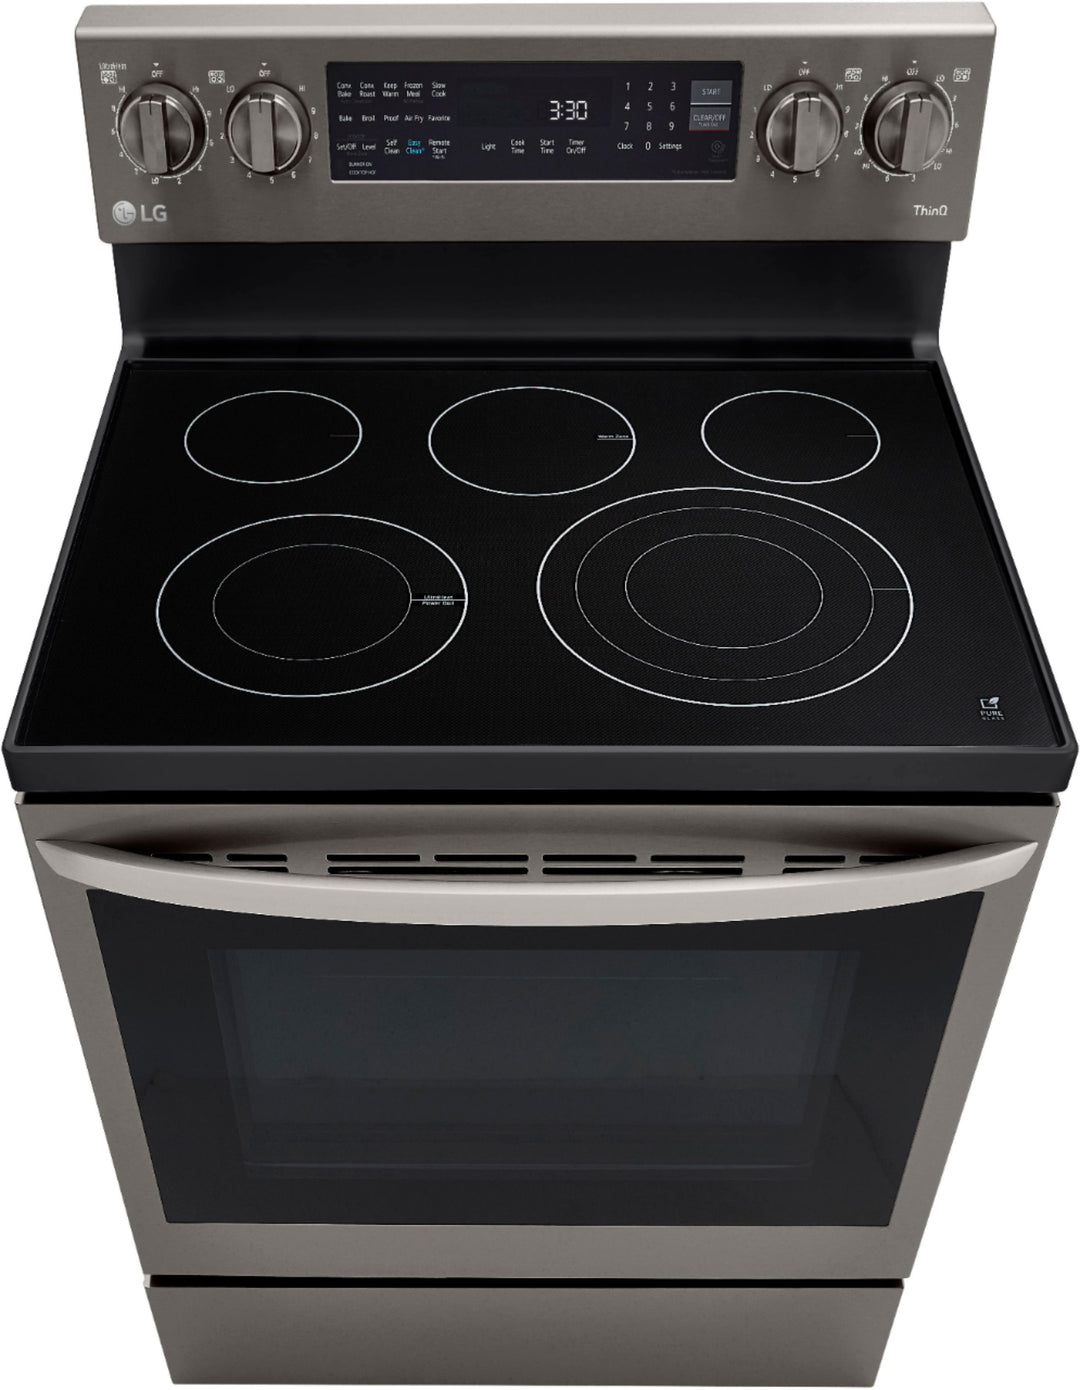 LG - 6.3 Cu. Ft. Smart Freestanding Electric Convection Range with EasyClean, Air Fry and InstaView - Black stainless steel_28